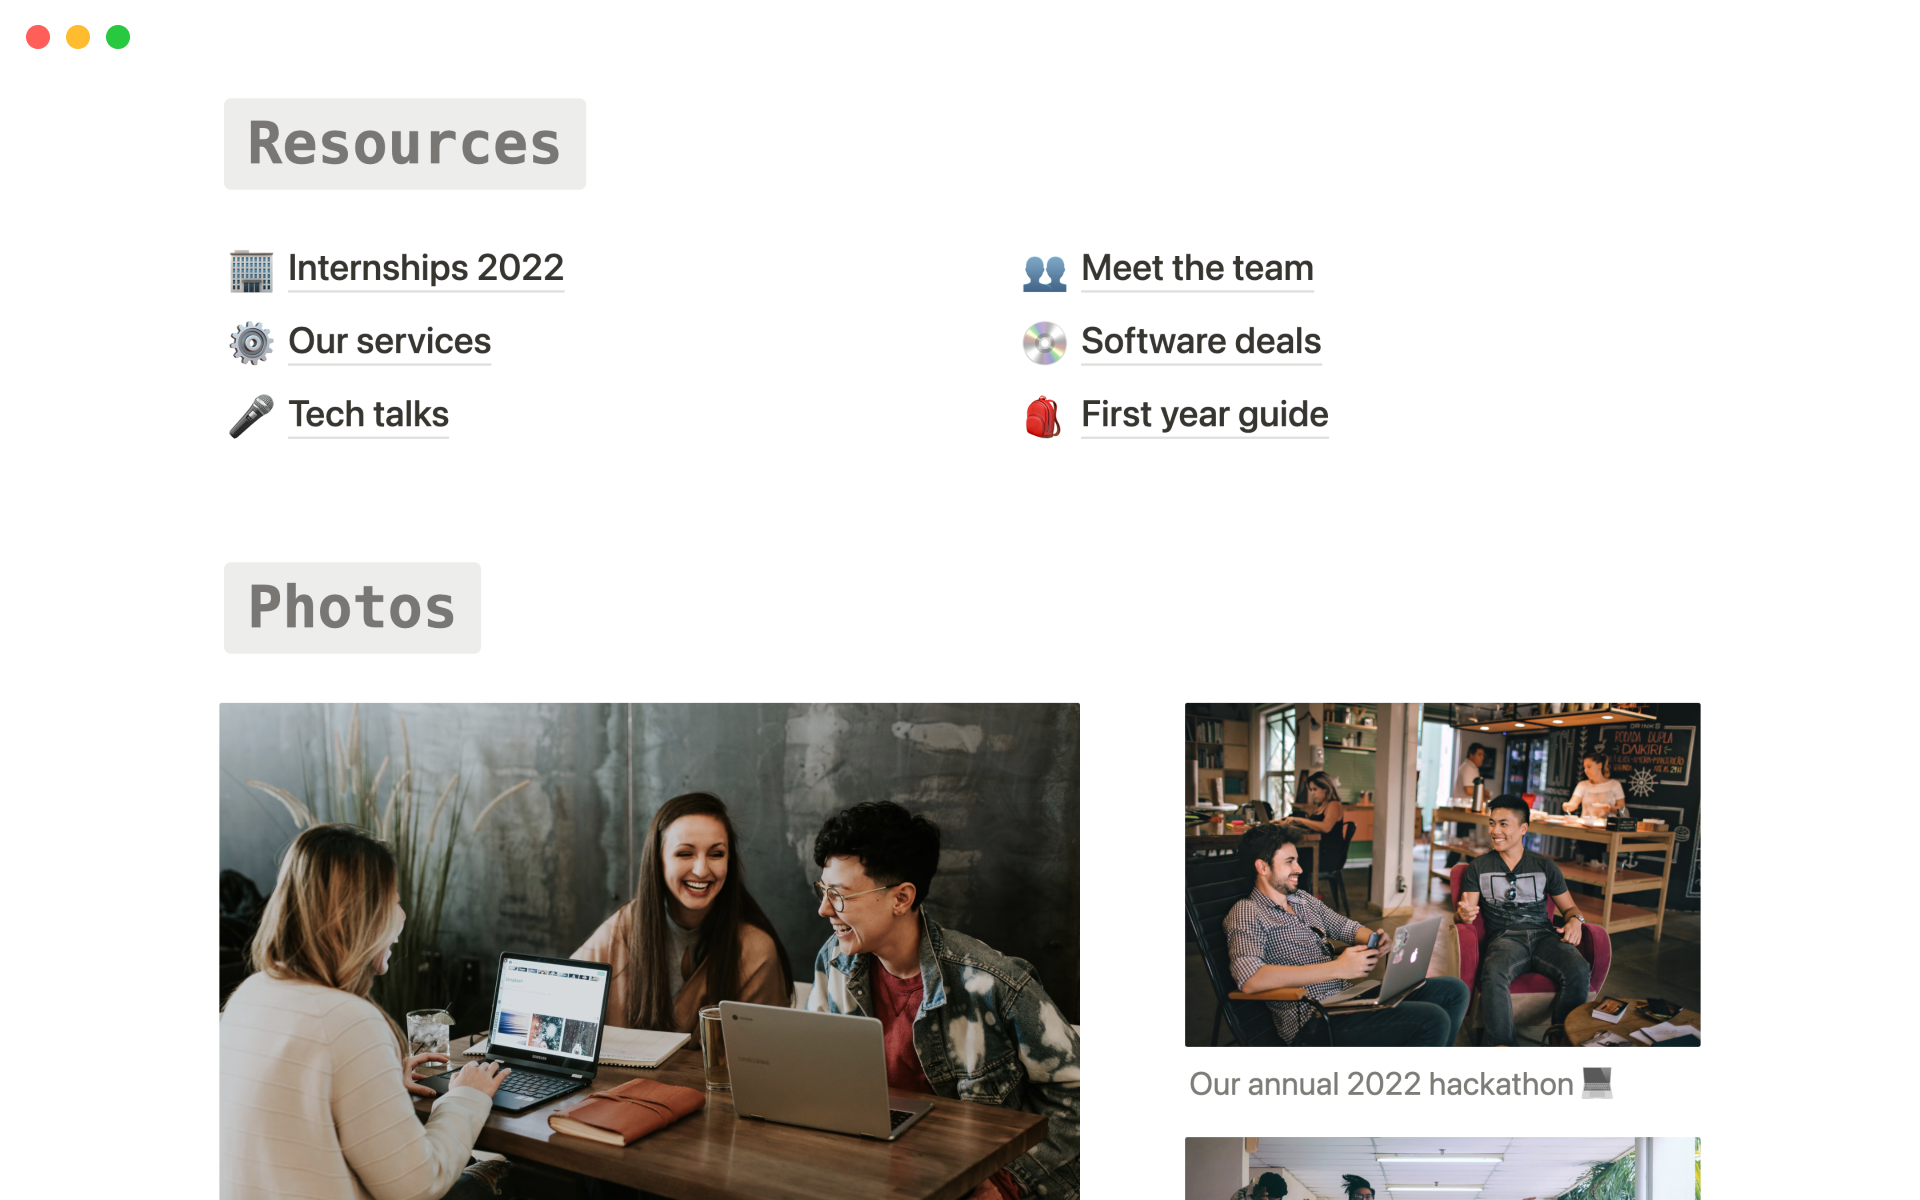 Create a public club home on Notion to host your hackathon events, news, internship guides, coding resources, and more!